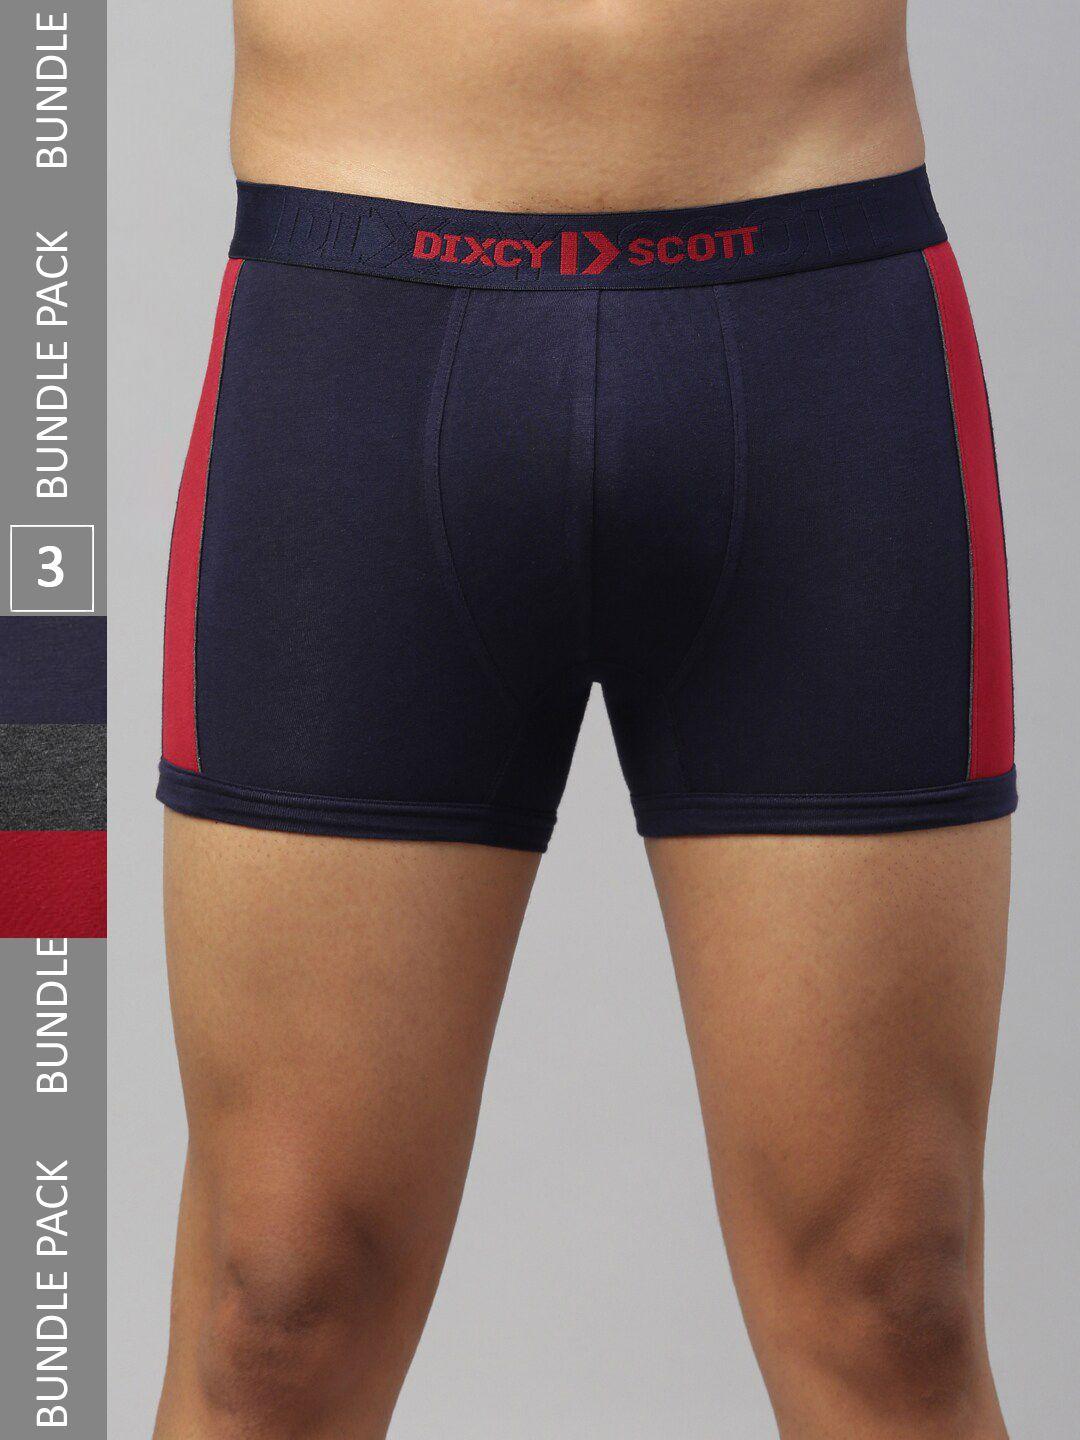 dixcy-scott-maximus-men-pack-of-3-assorted-cotton-anti-microbial-trunks